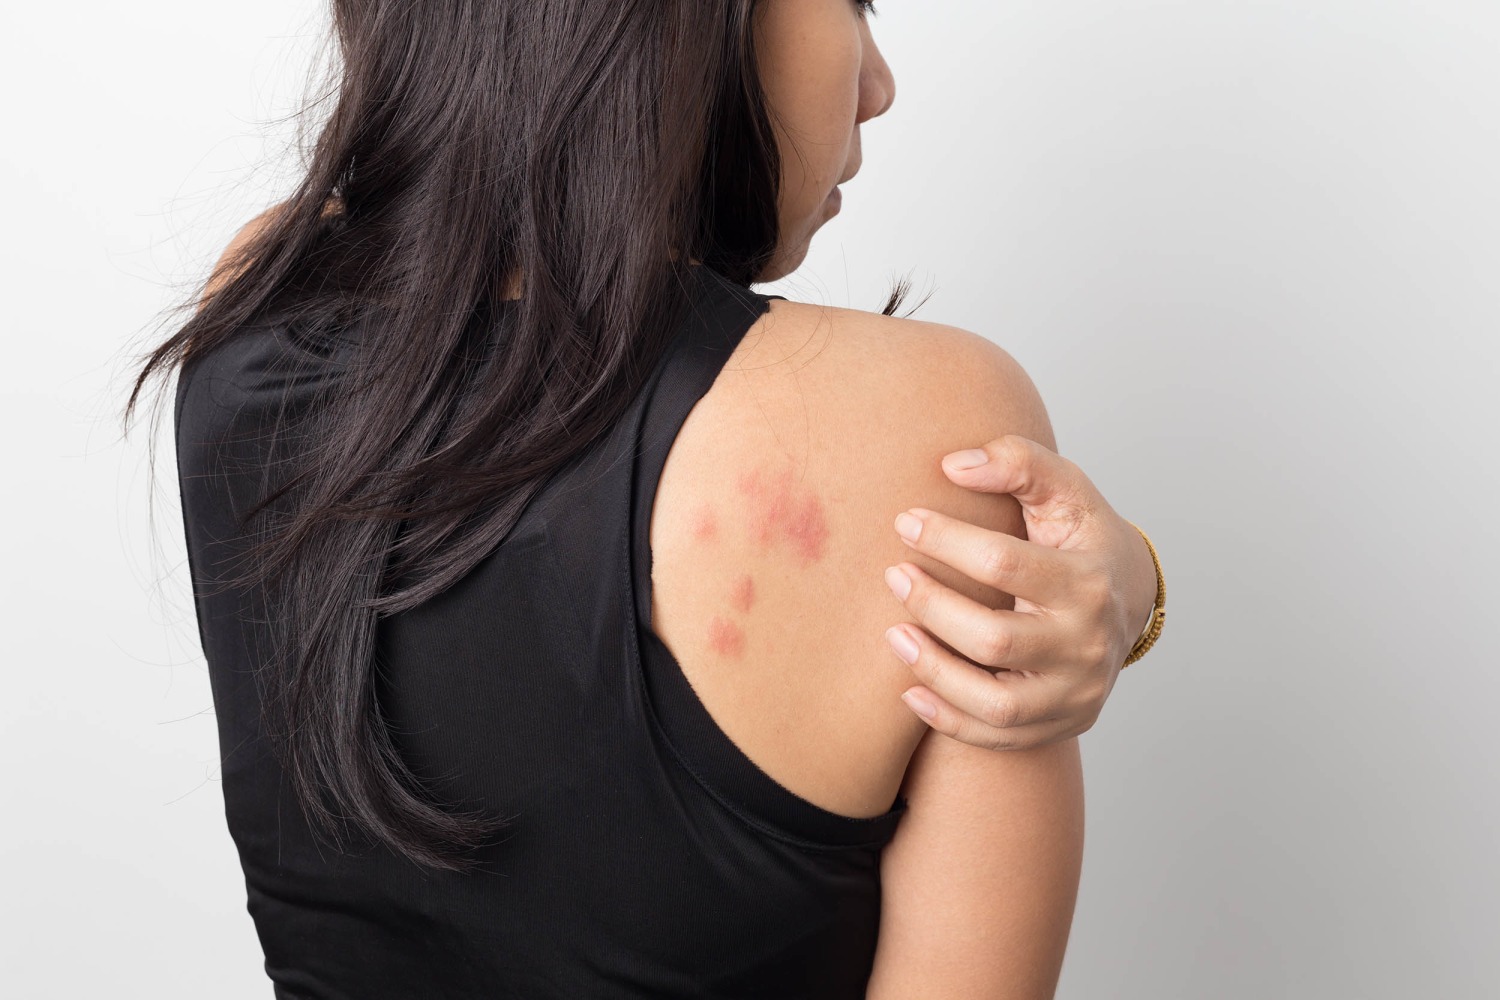 Rash and Skin That Feels Hot to the Touch: Causes and Photos